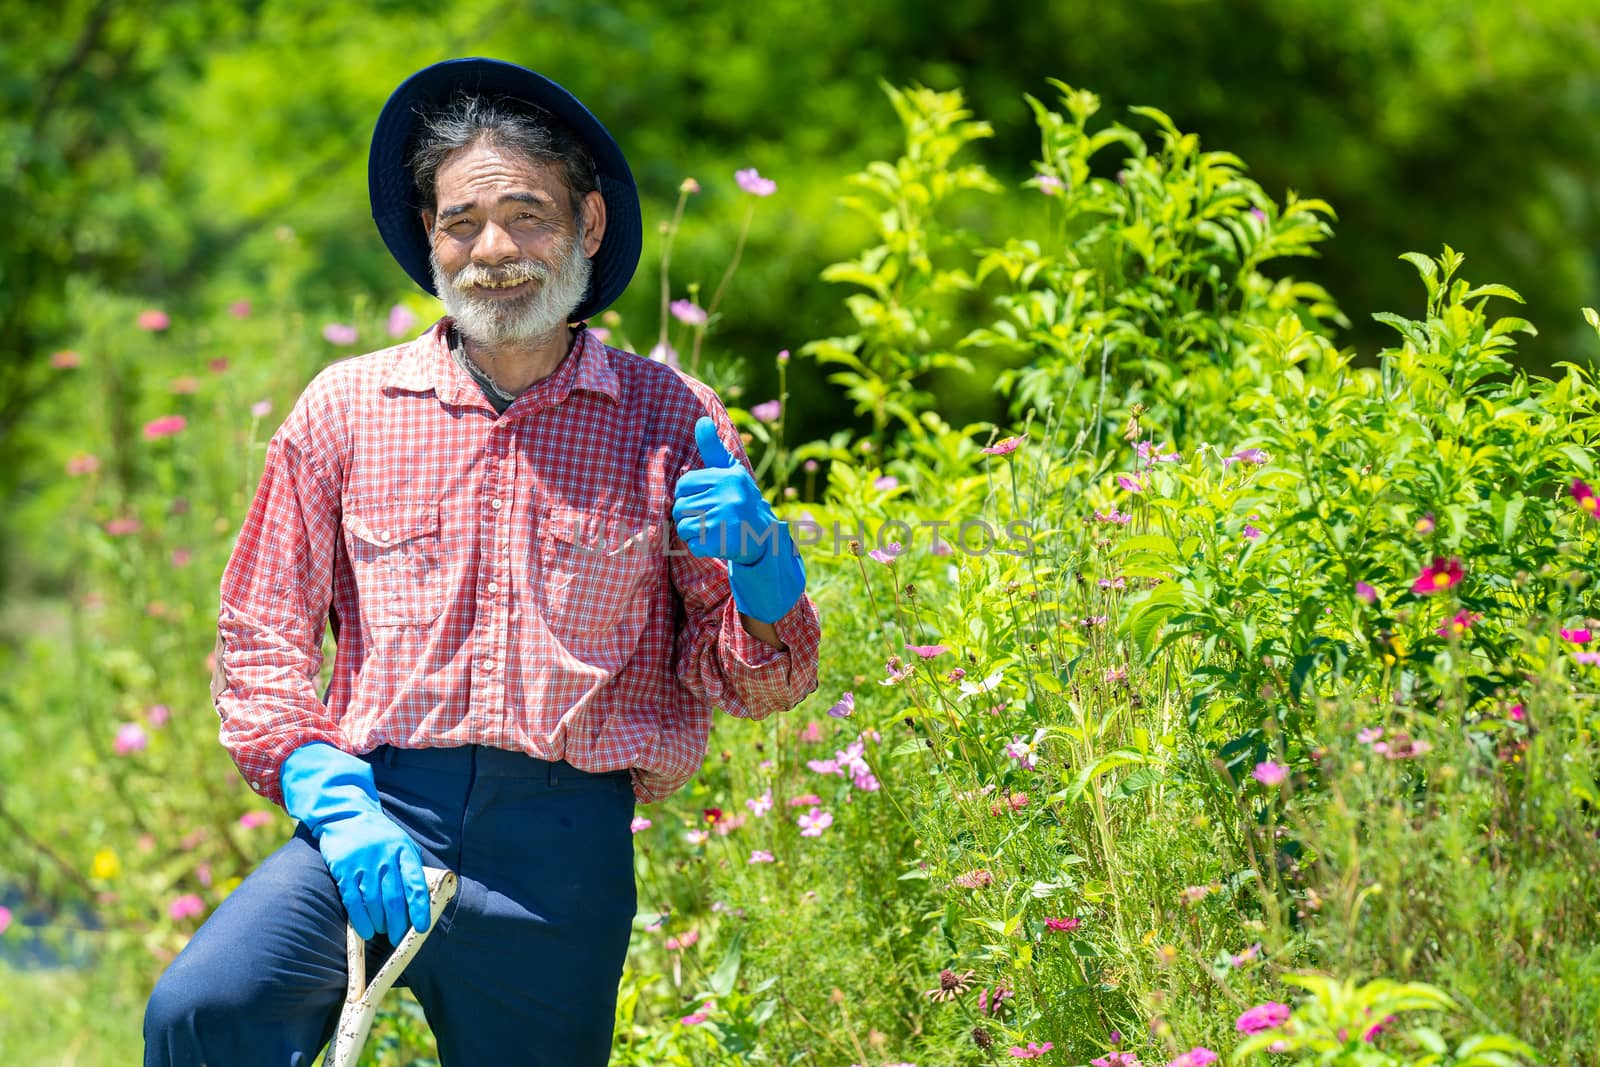 Portrait of senior man with gardening tools outdoors working in the garden.